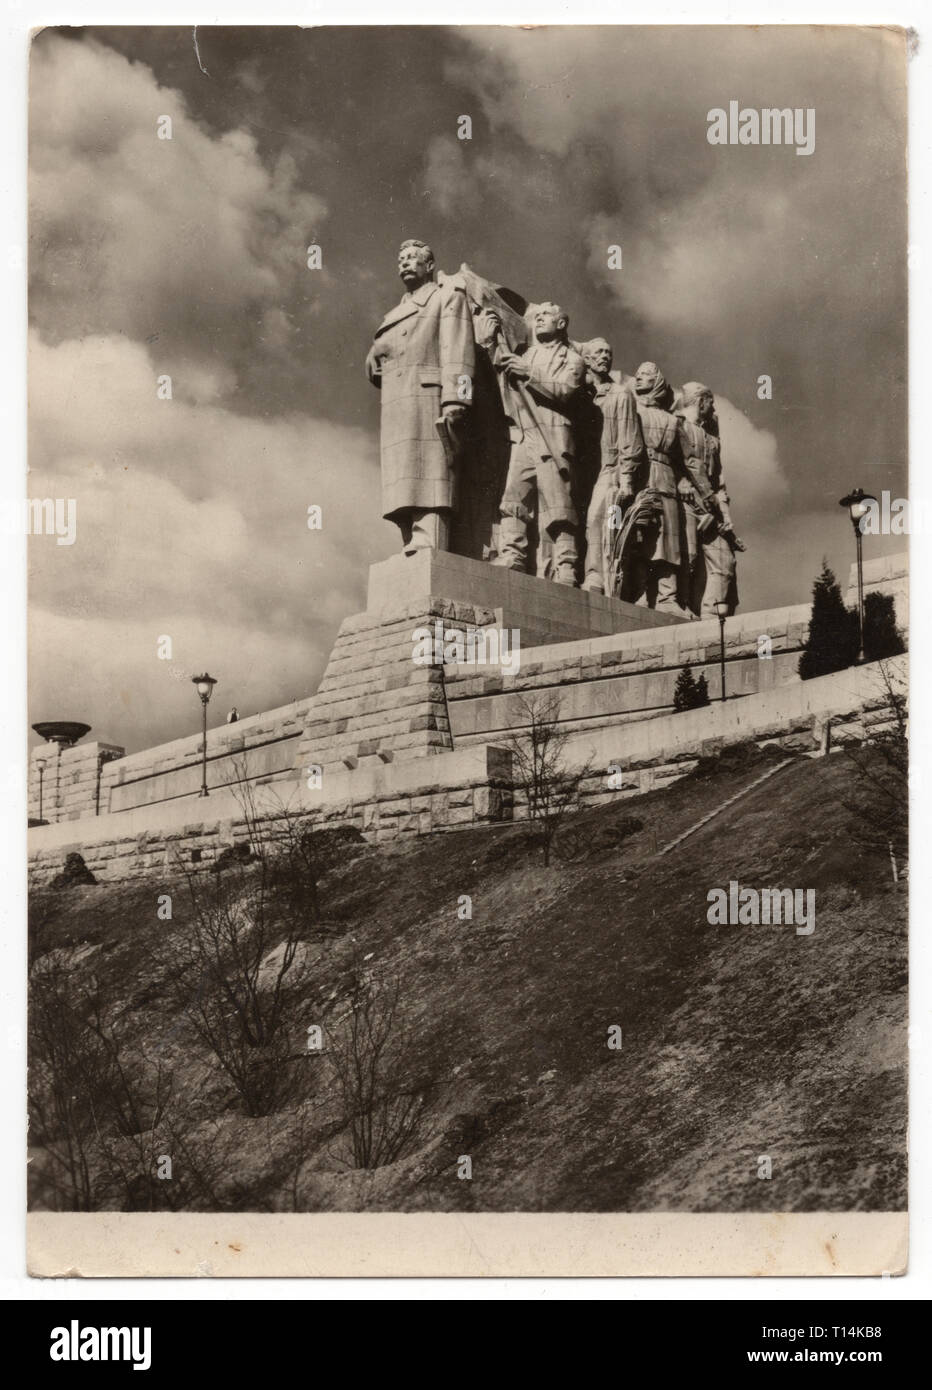 Stalin's Monument in Prague, Czechoslovakia, depicted in the Czechoslovak vintage postcard issued in 1955. Courtesy of the Azoor Postcard Collection. Stock Photo